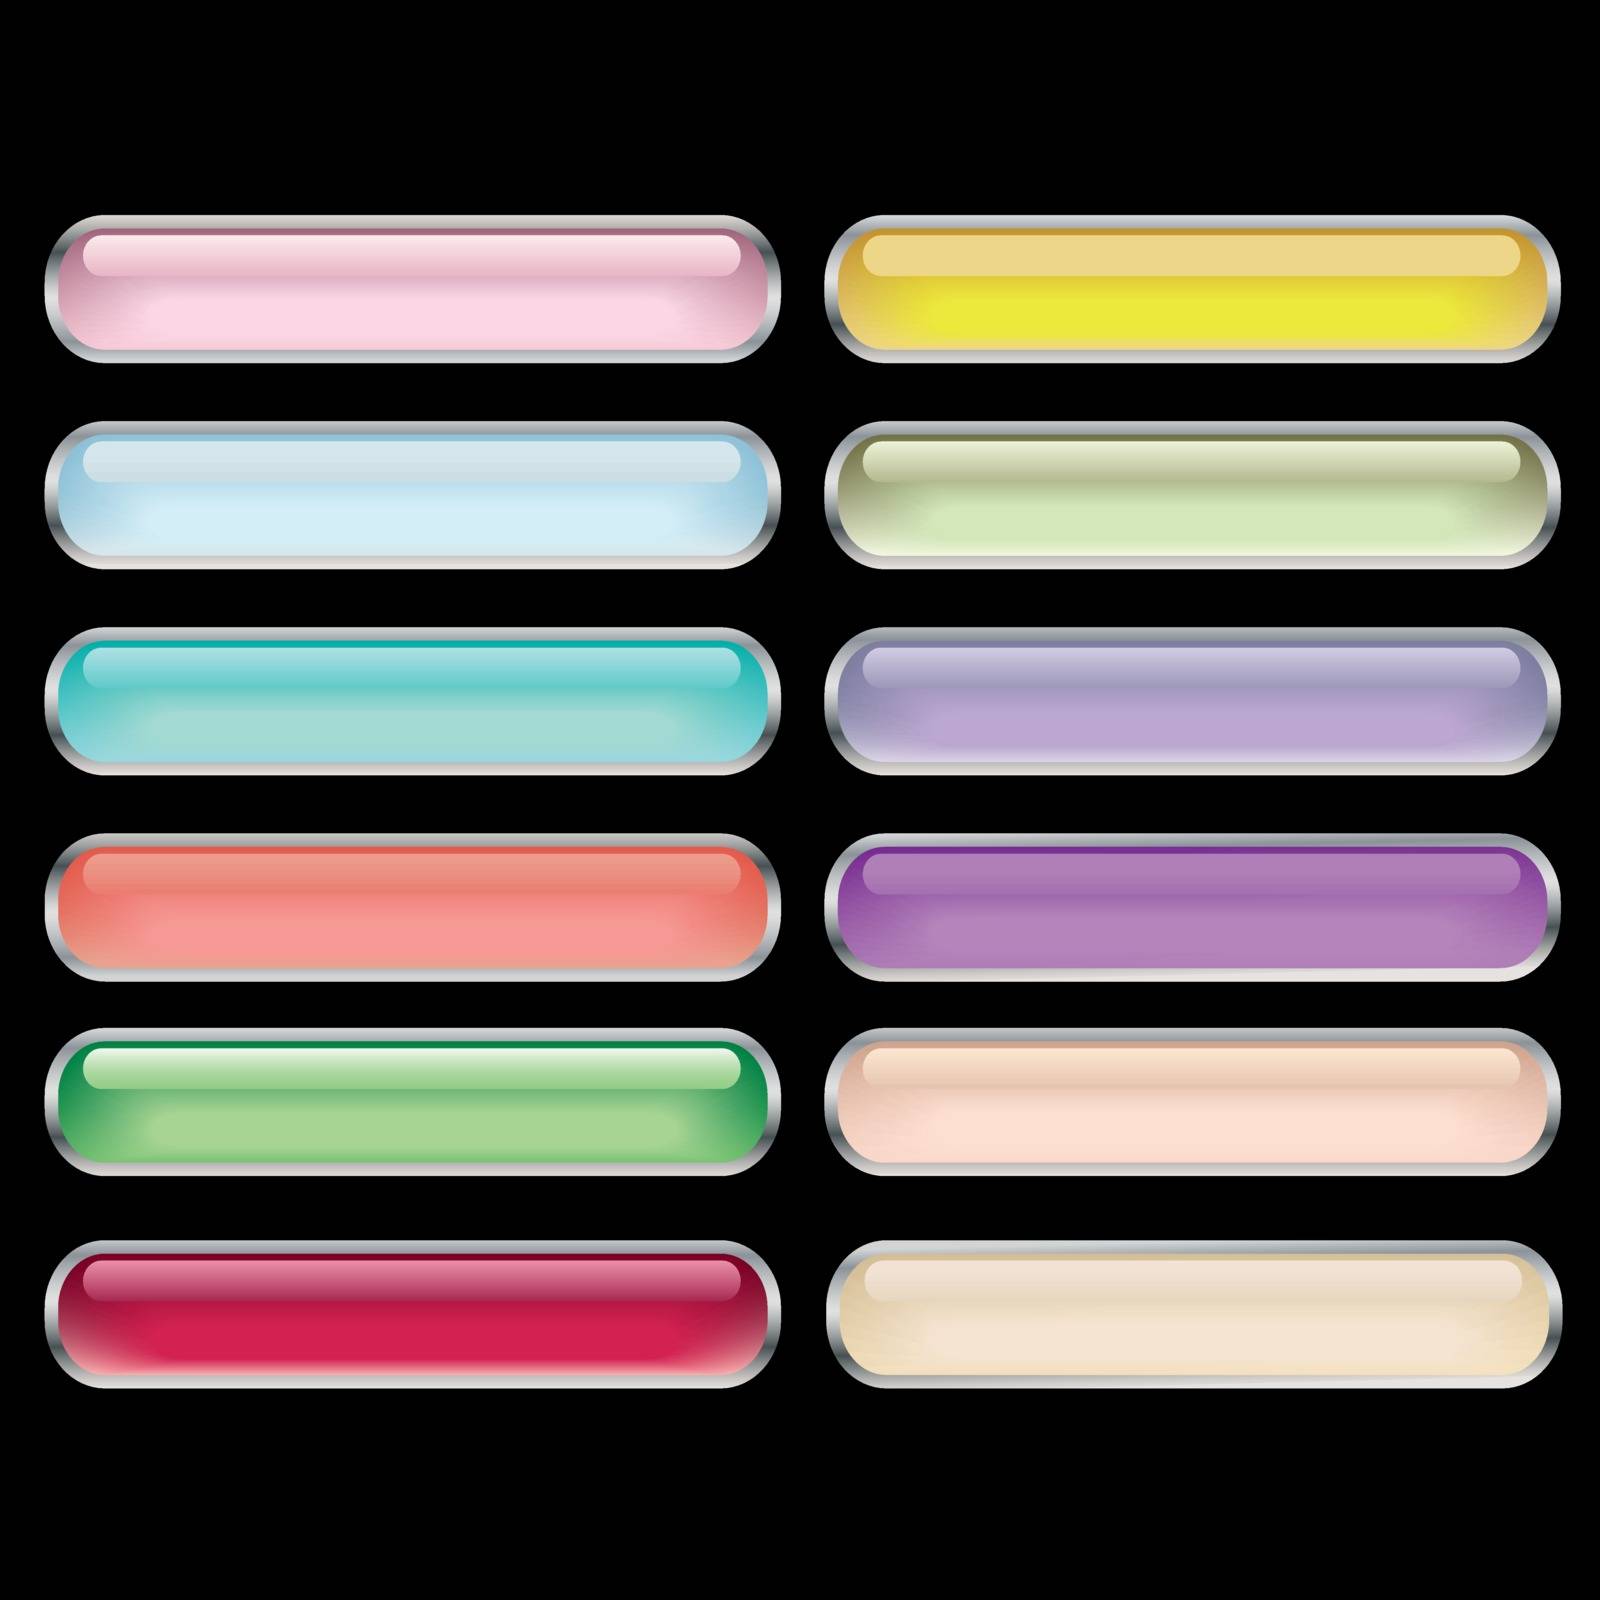 12 glass buttons of the miscellaneous colour